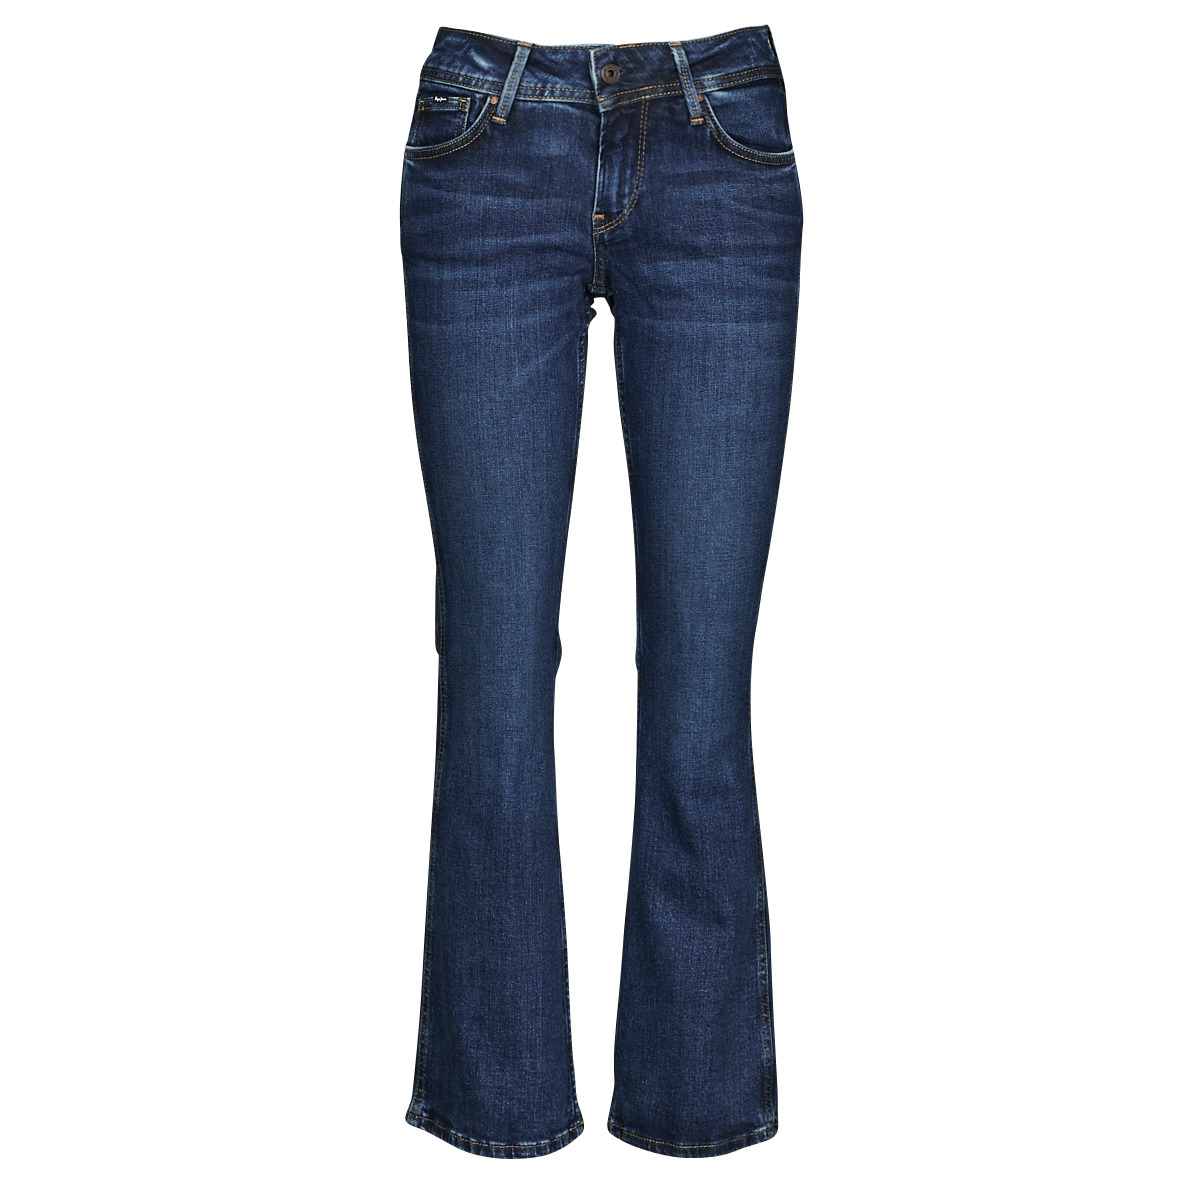 Pepe Jeans - Bootcut Jeans Blue - Spartoo GOOFASH